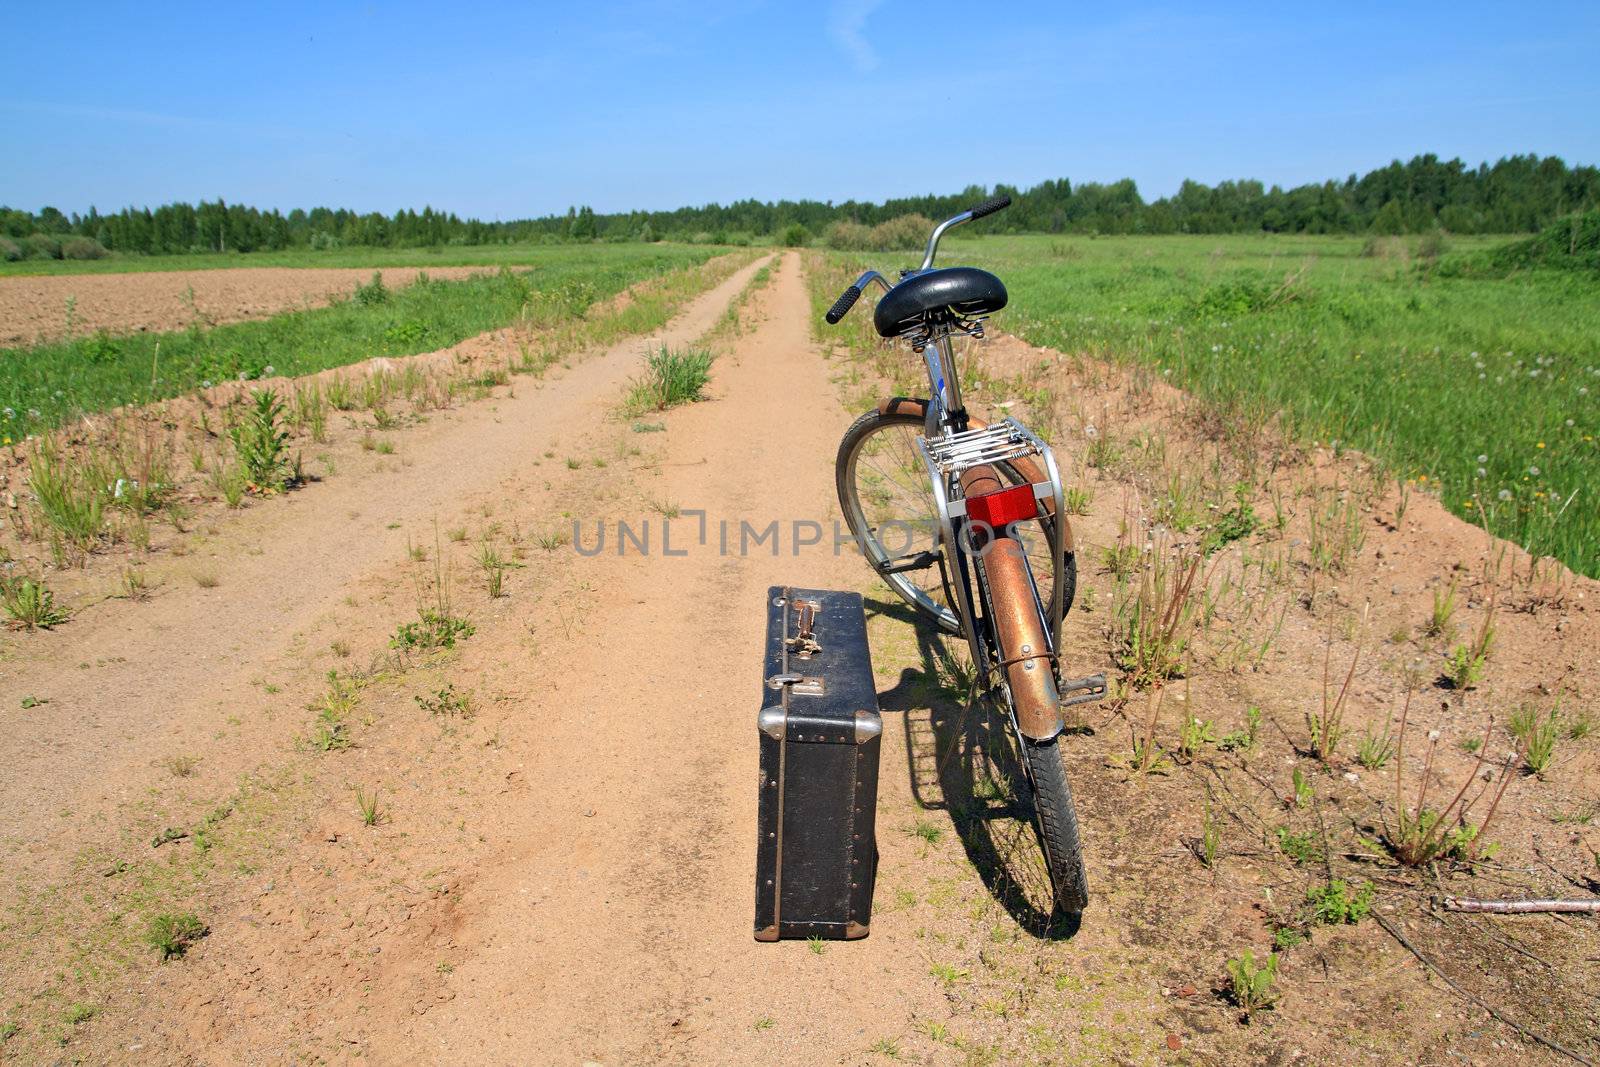 old valise near old bicycle on rural road